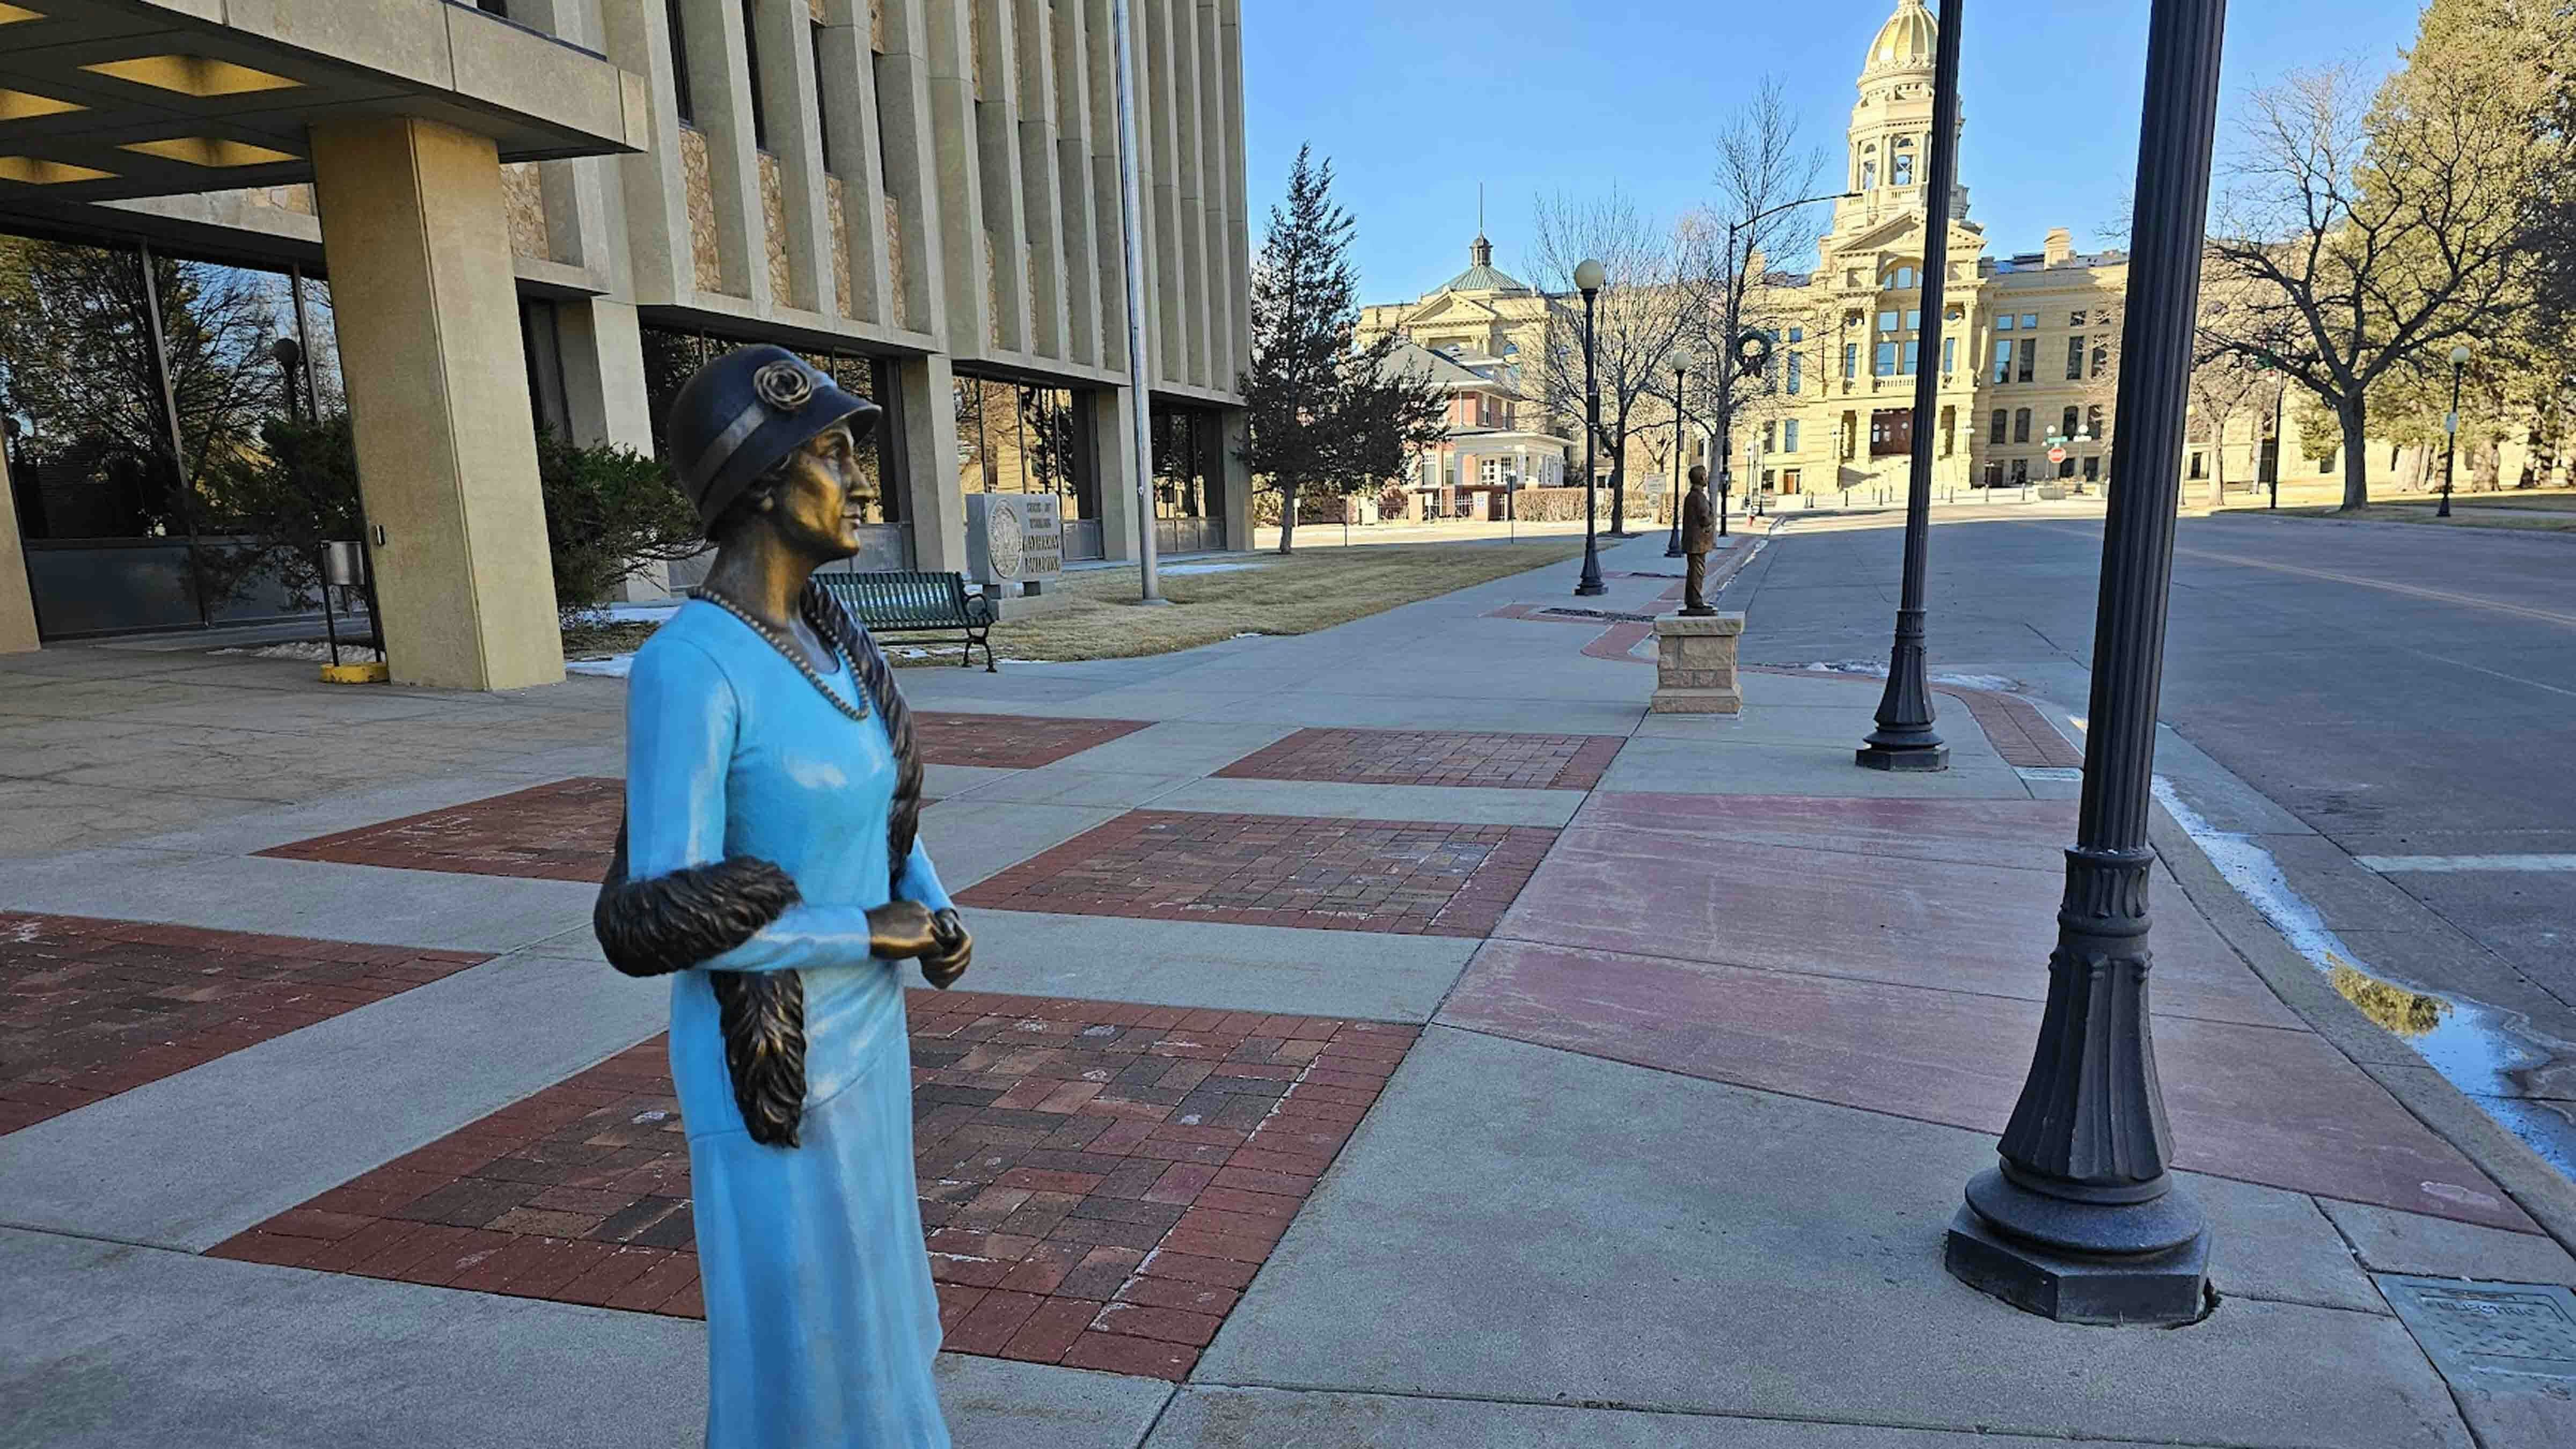 Wyoming's Nellie Tayloe Ross, first female governor in the United States, looks sharp, as if about to turn and walk to Wyoming's state Capitol, in the background